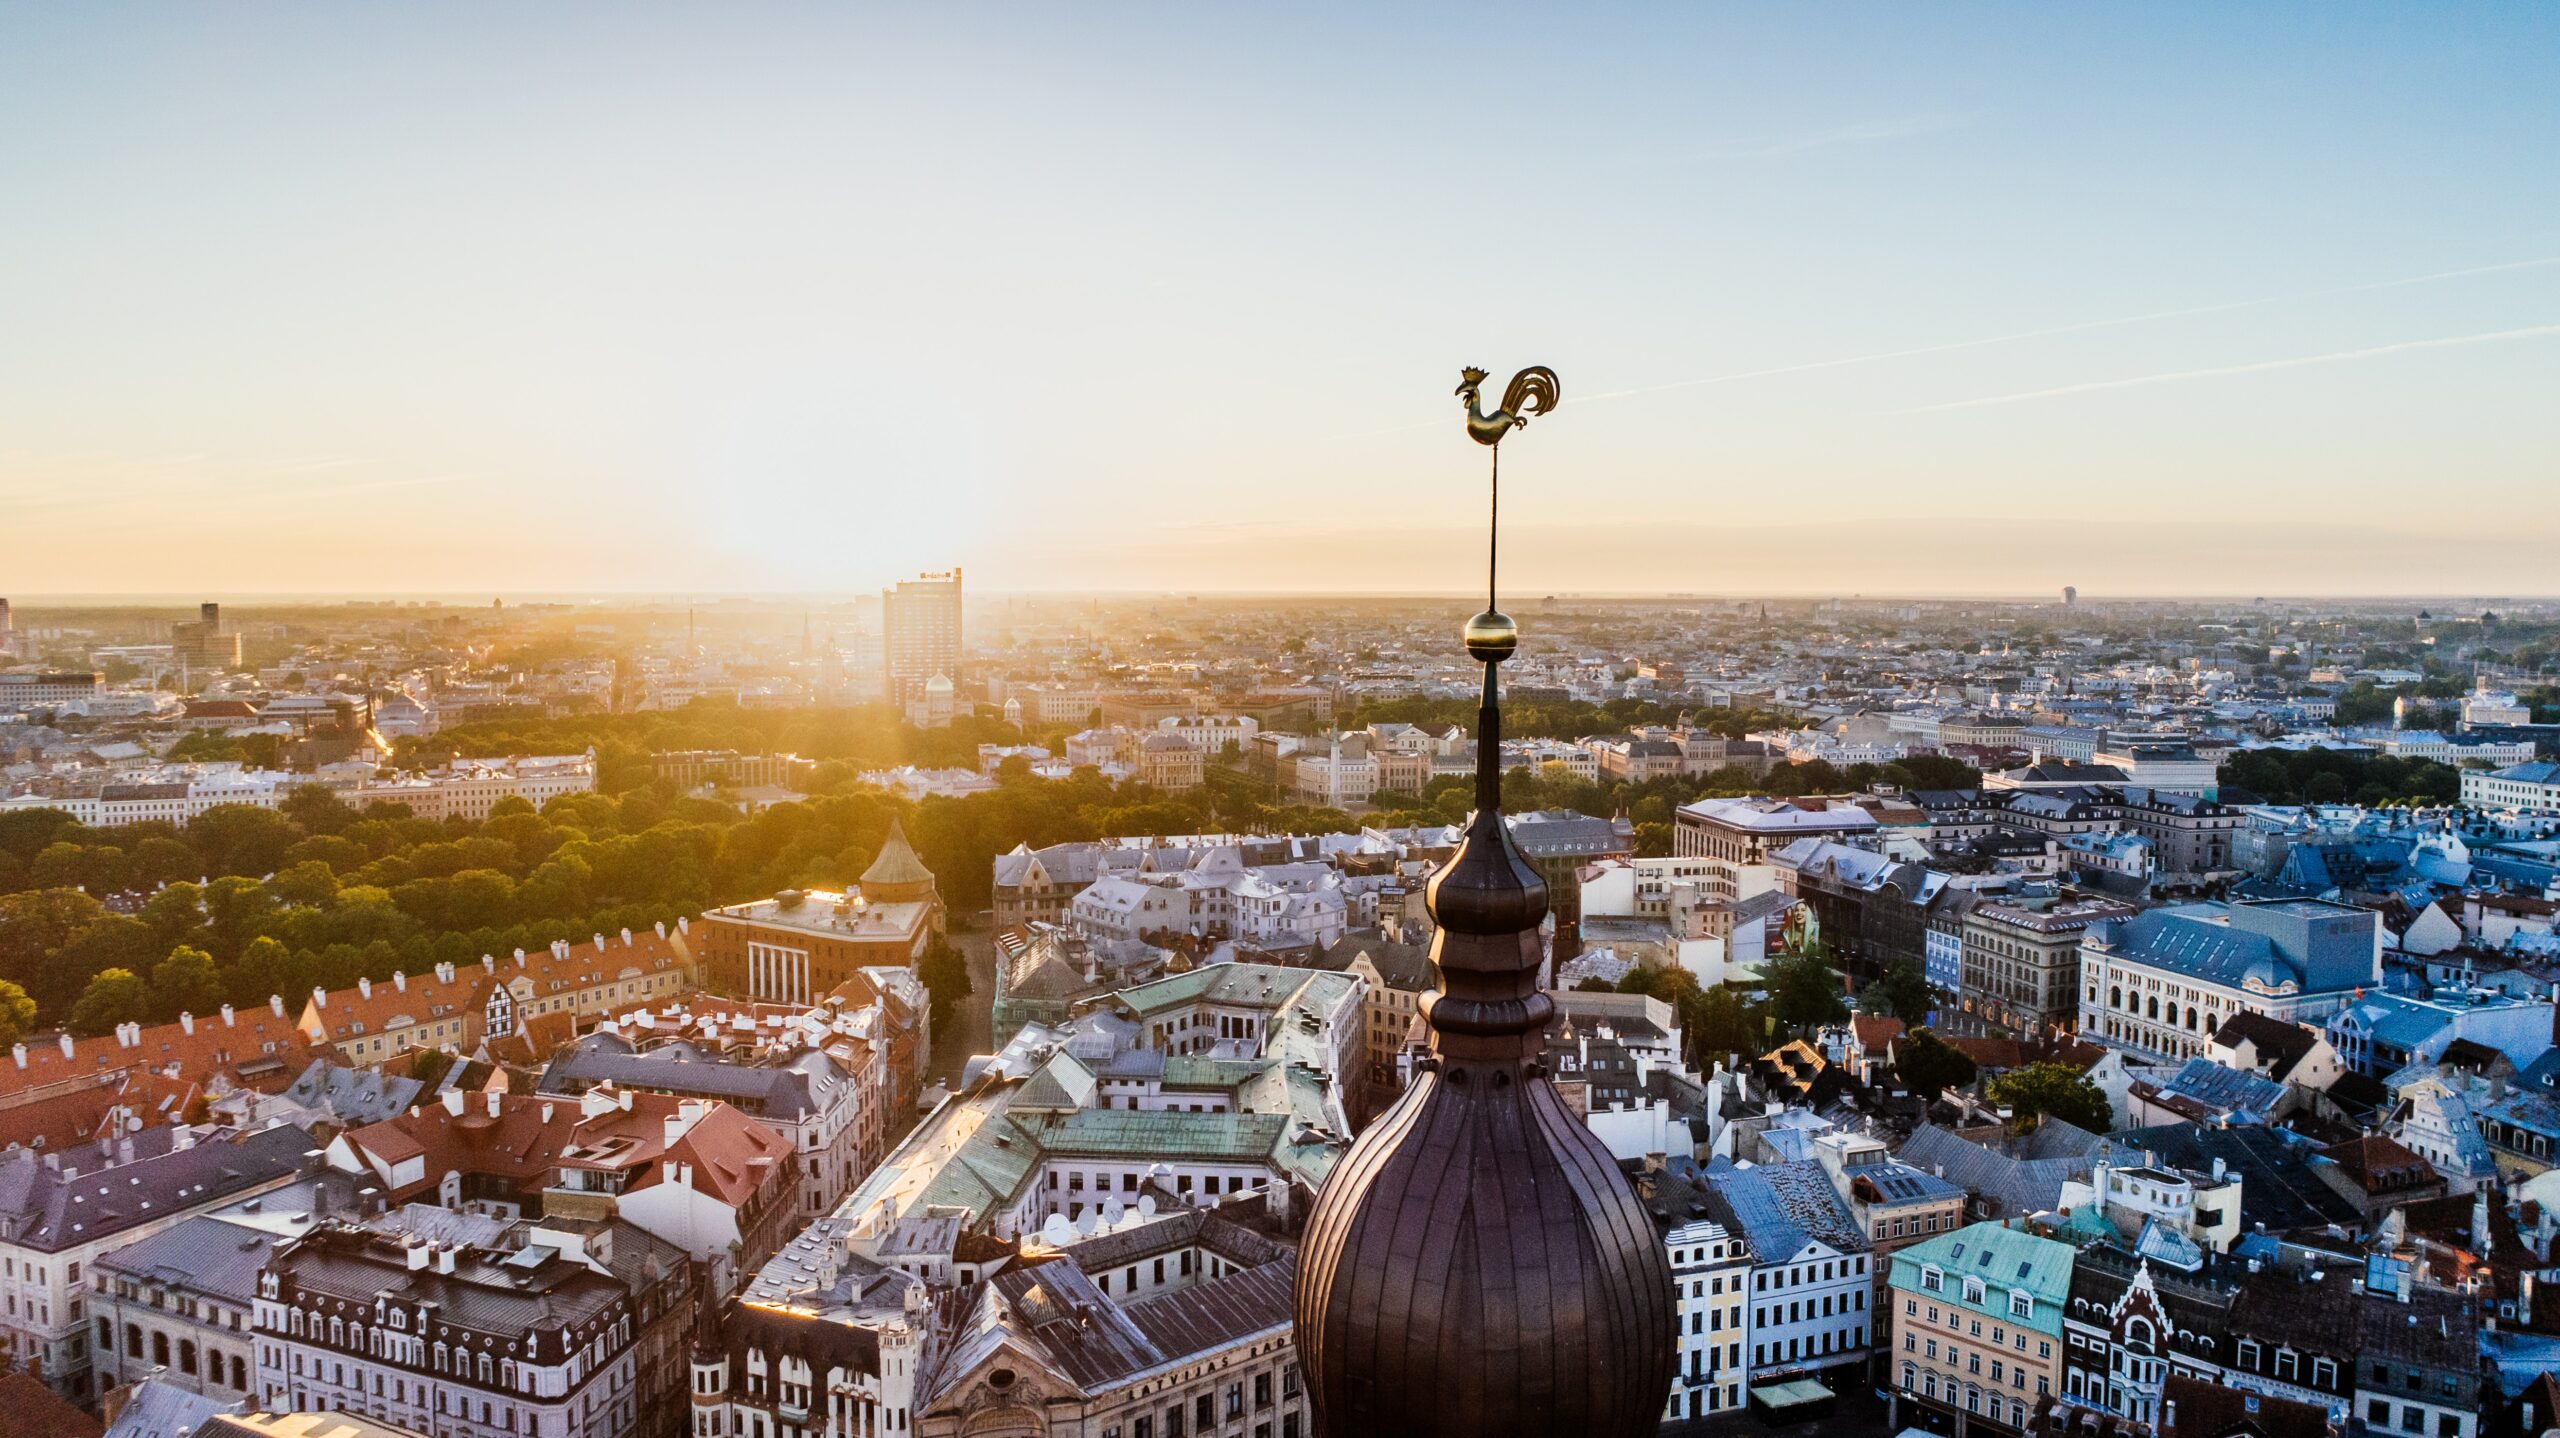 Riga - the most popular of the Cities in Latvia